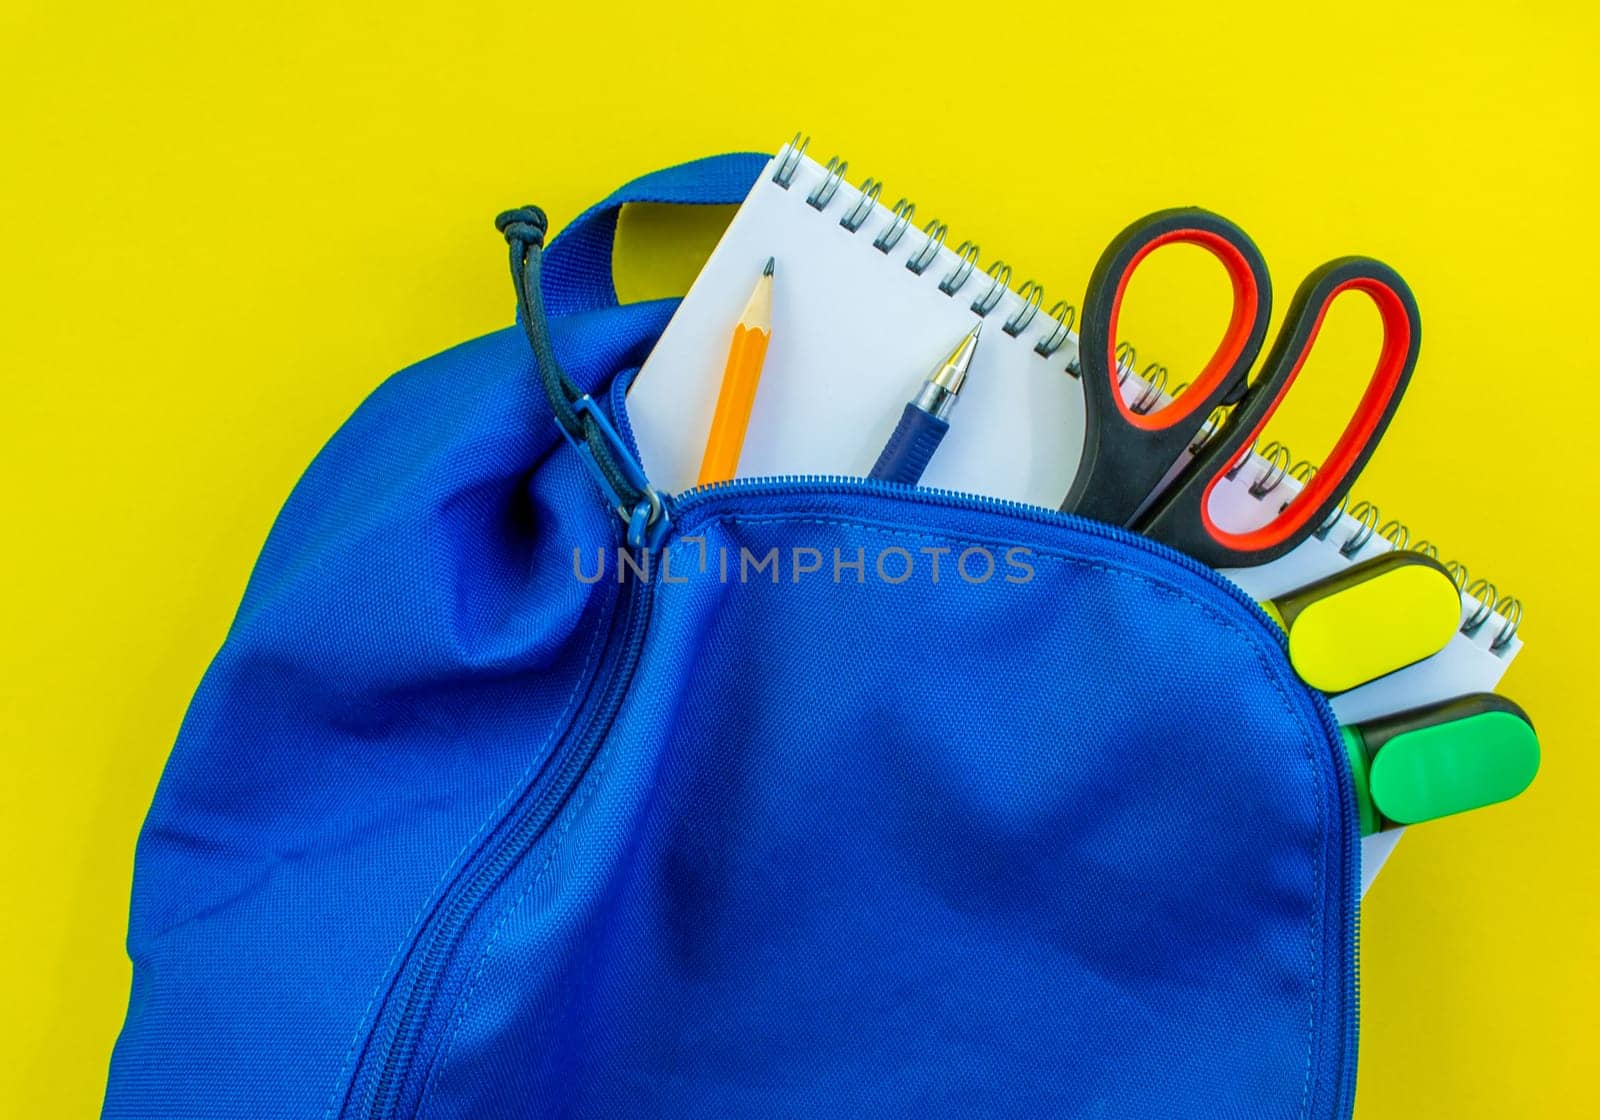 School backpack, pencil, pen, markers, scissors and notepad on a yellow background. School blue backpack with notepad, pencil, markers, scissors and pen inside on a yellow background.